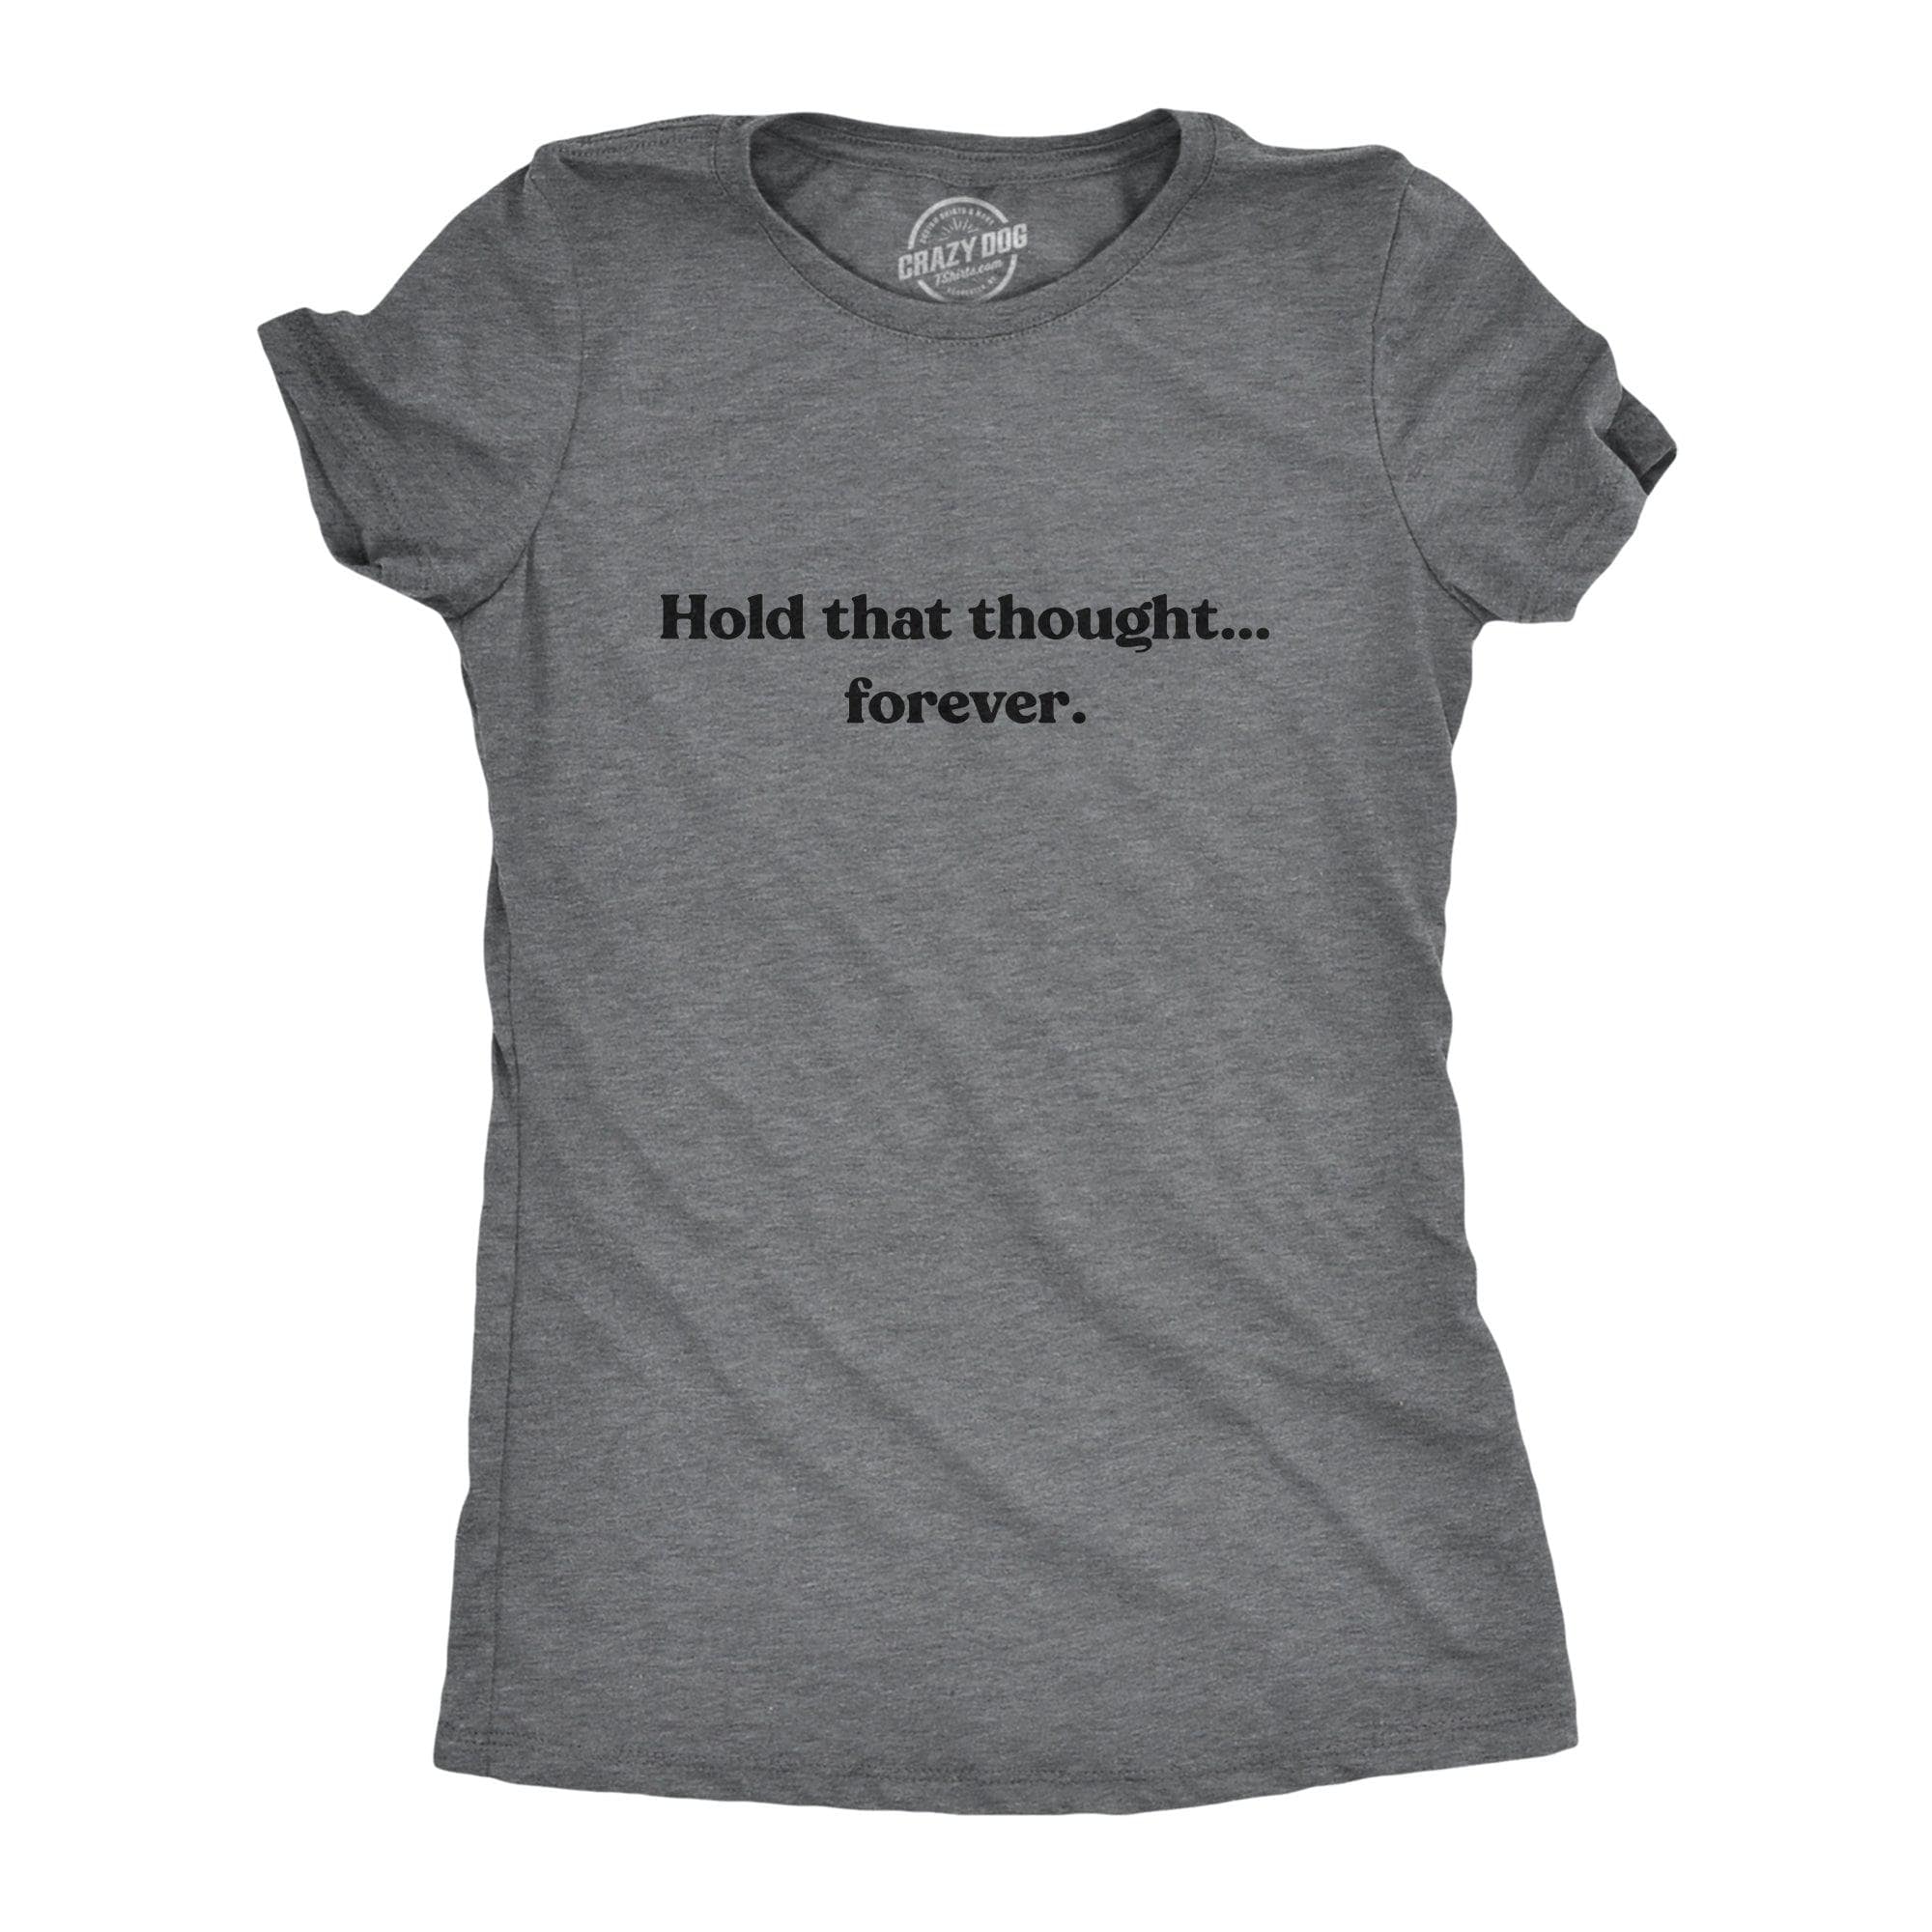 Hold That Thought…Forever Women's Tshirt  -  Crazy Dog T-Shirts